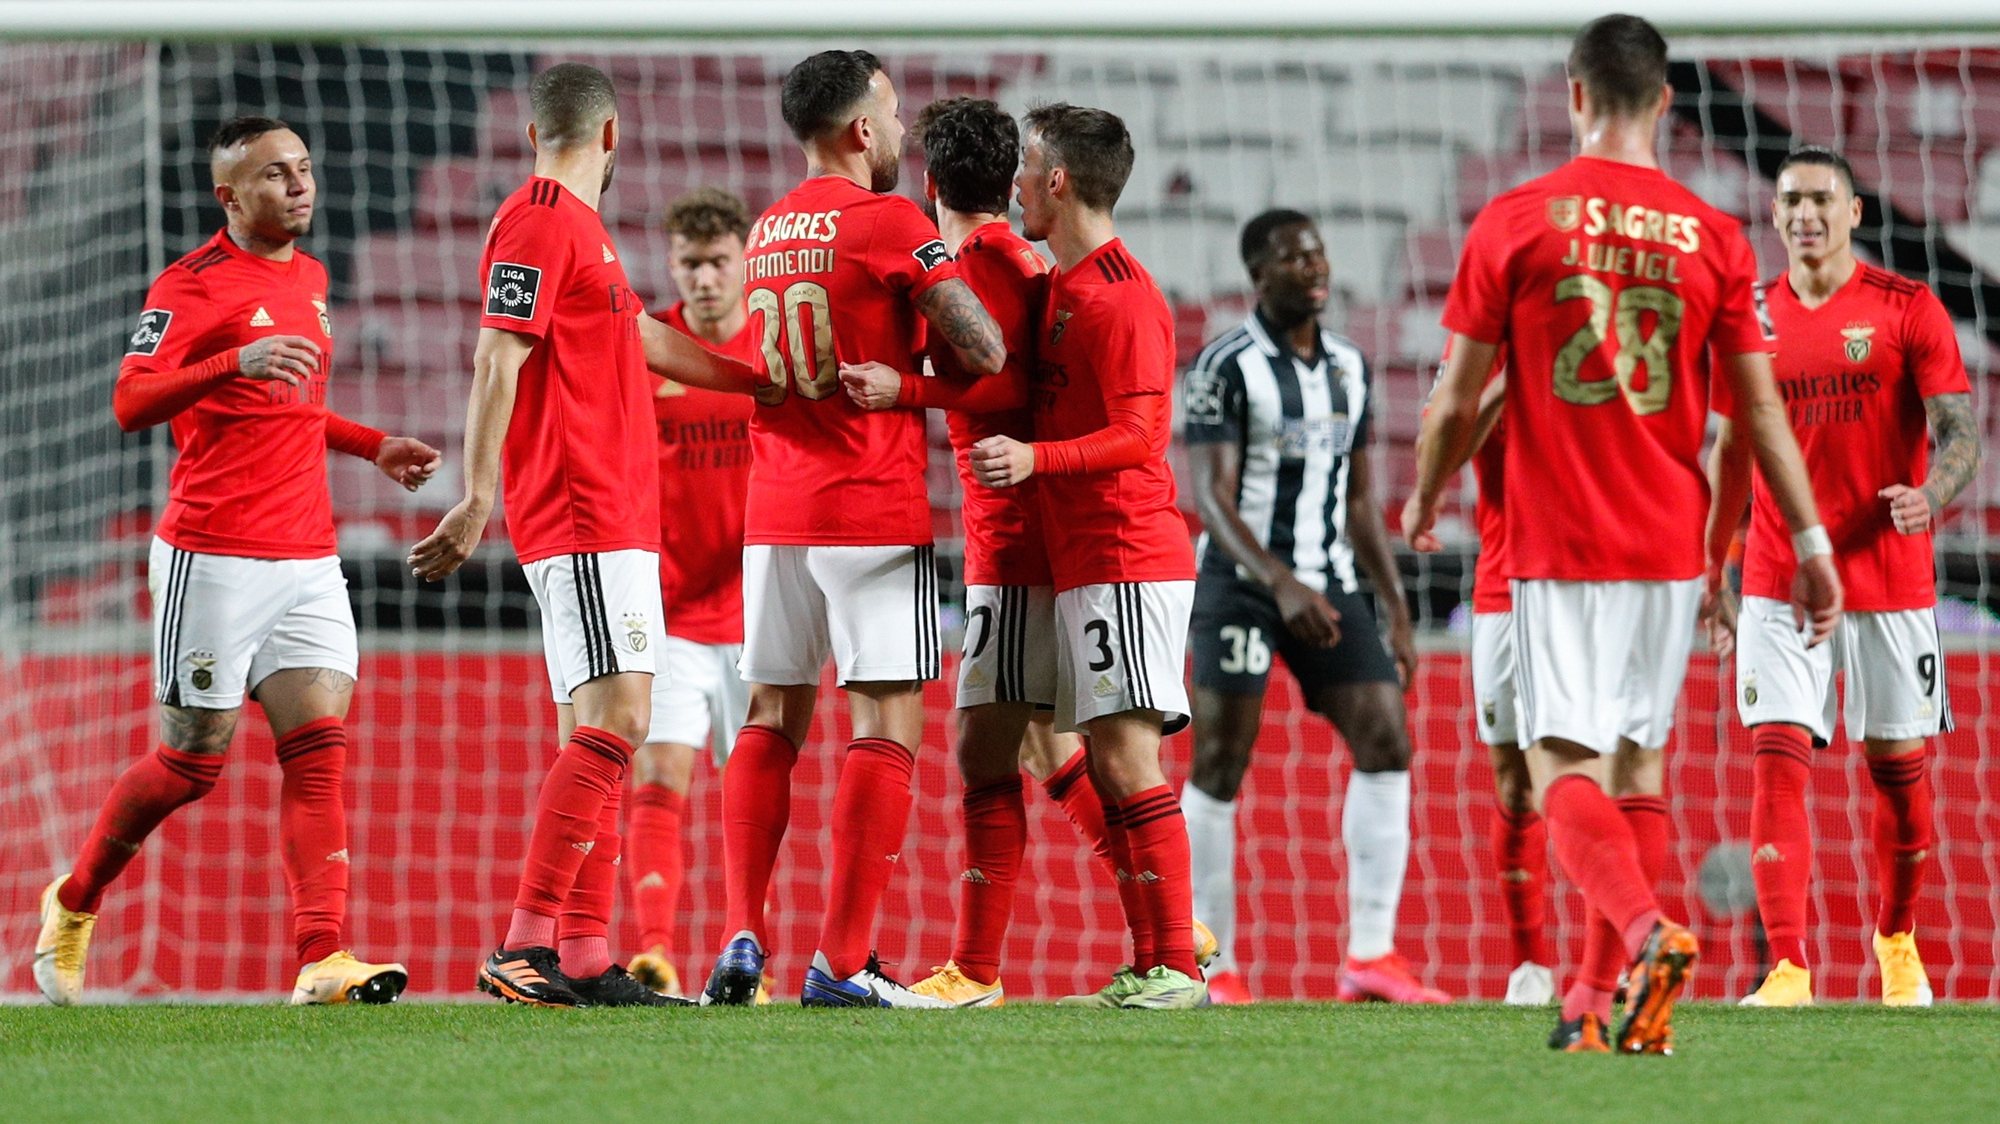 Benfica&#039;s players celebrate after scoring a goal against Portimonense during their Portuguese First League soccer match held at Luz Stadium, Lisbon, Portugal, 29th December 2020.  ANTONIO COTRIM/LUSA